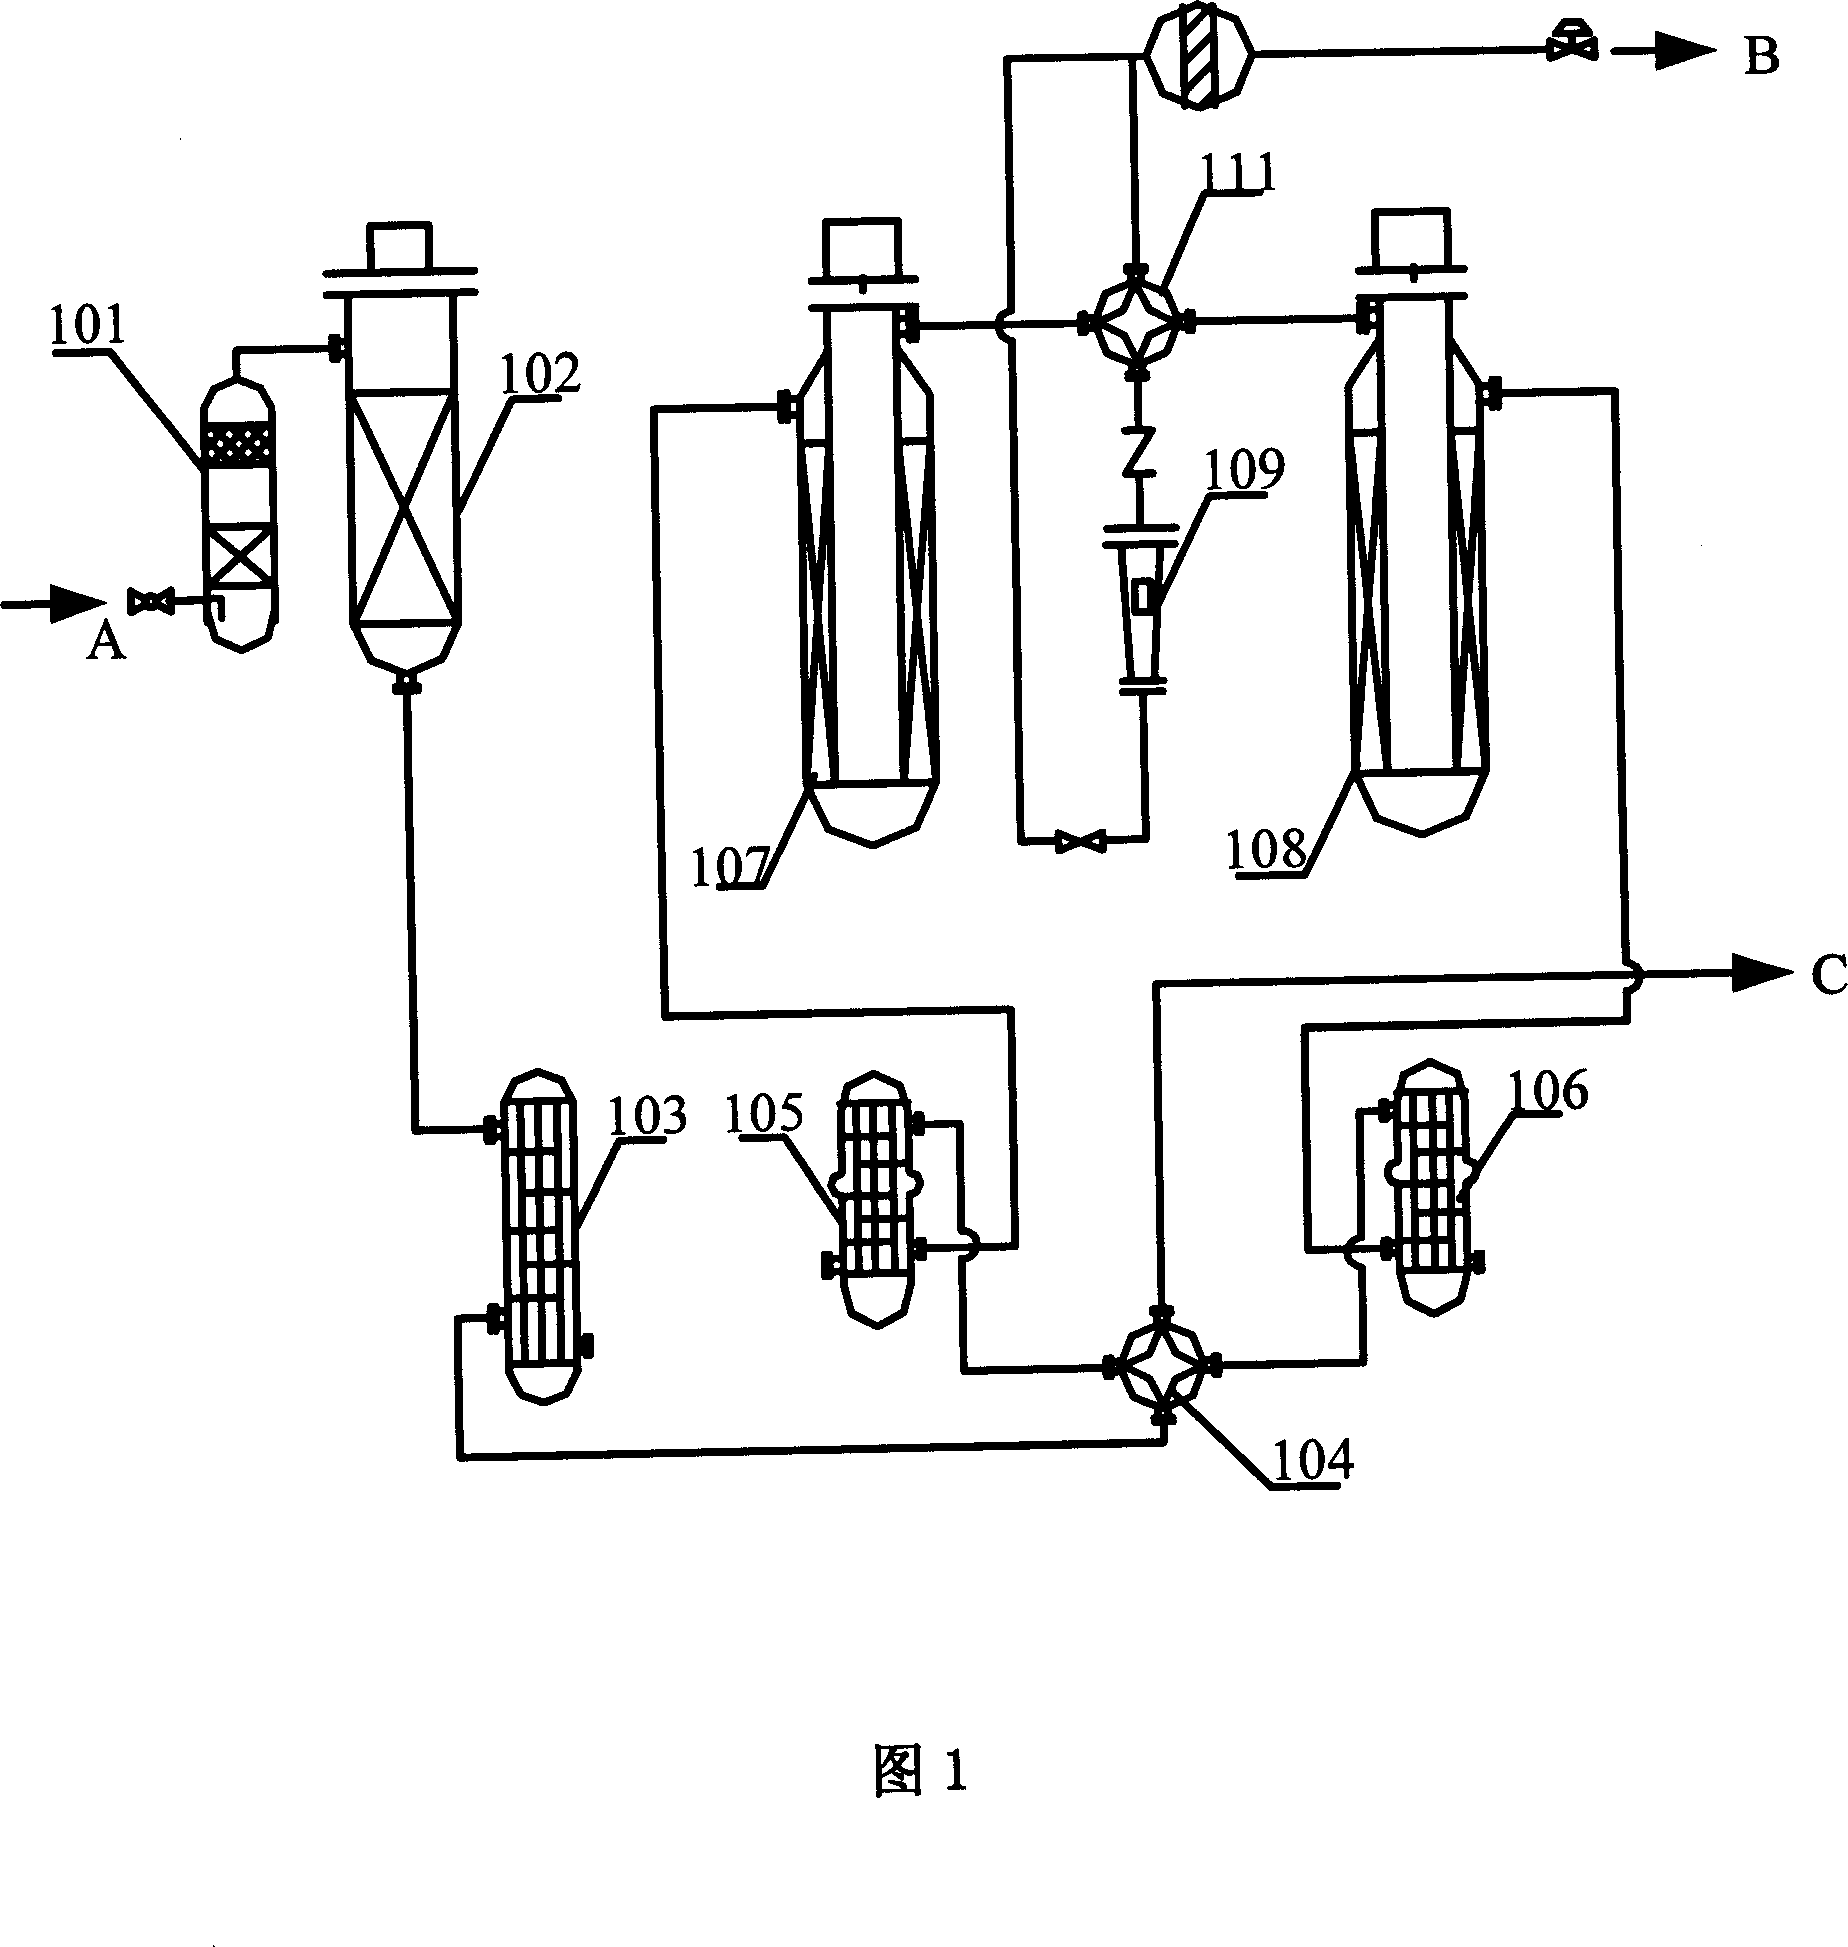 Method of continuous purifying hydrogen generated by electrolyzing water